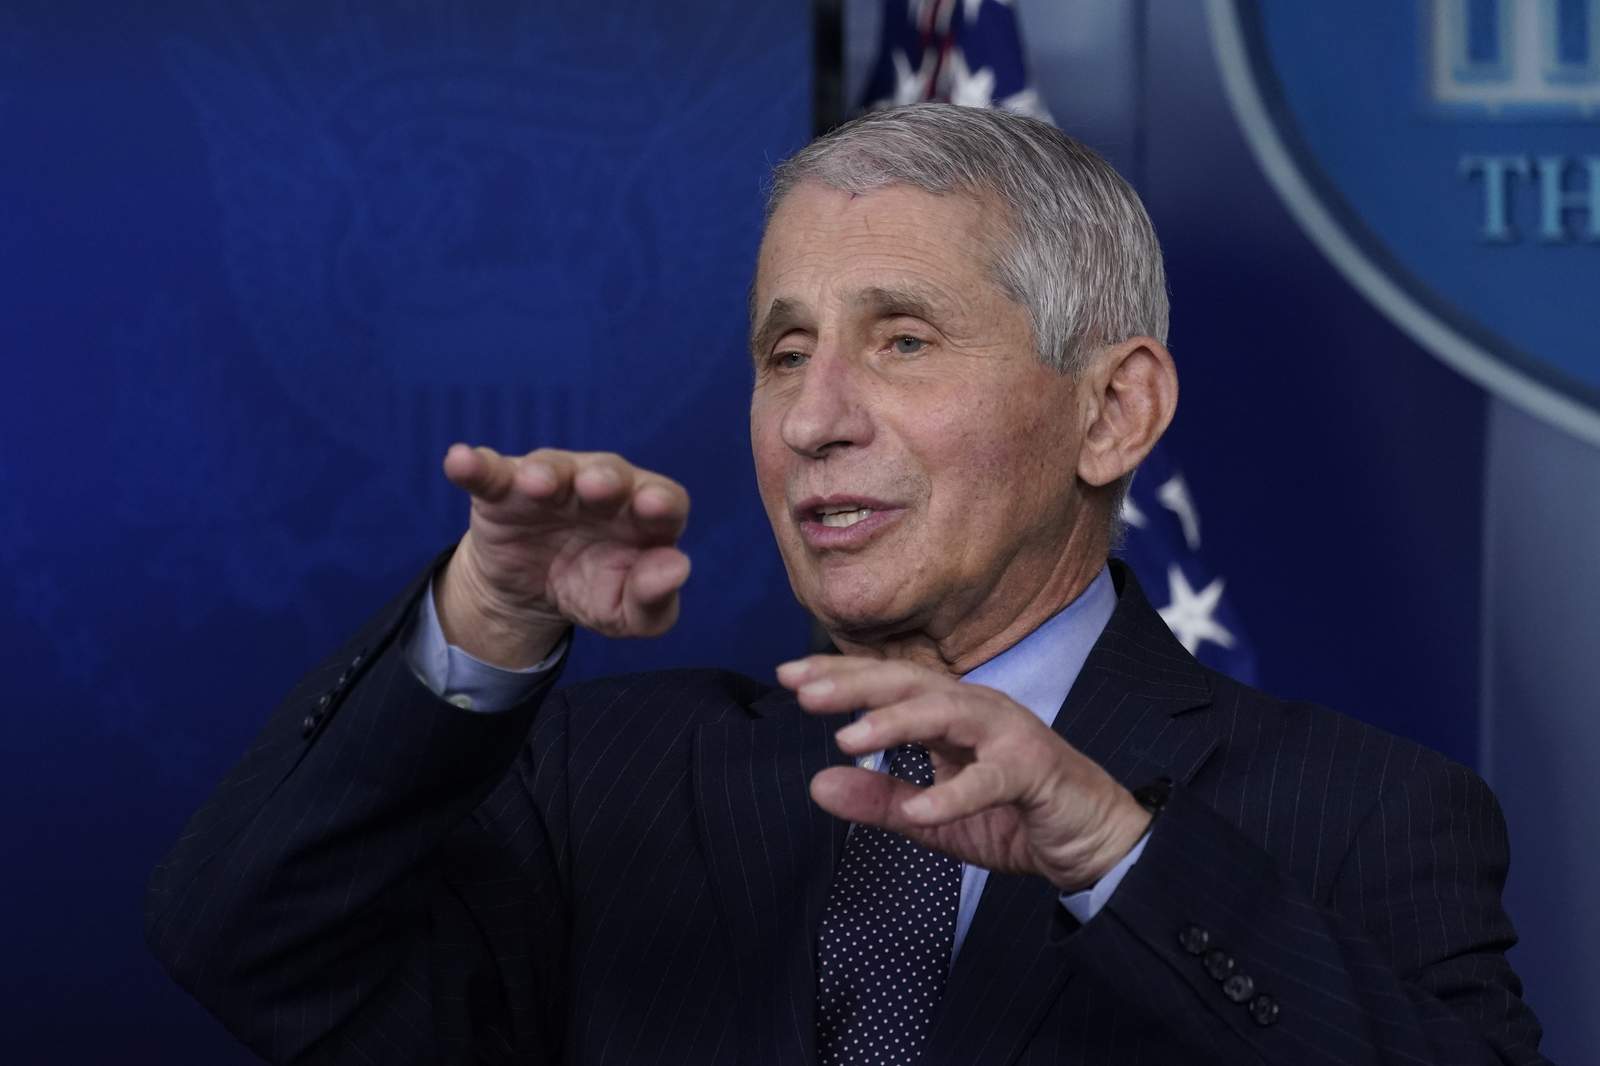 Fauci wins $1 million Israeli prize for ‘defending science’